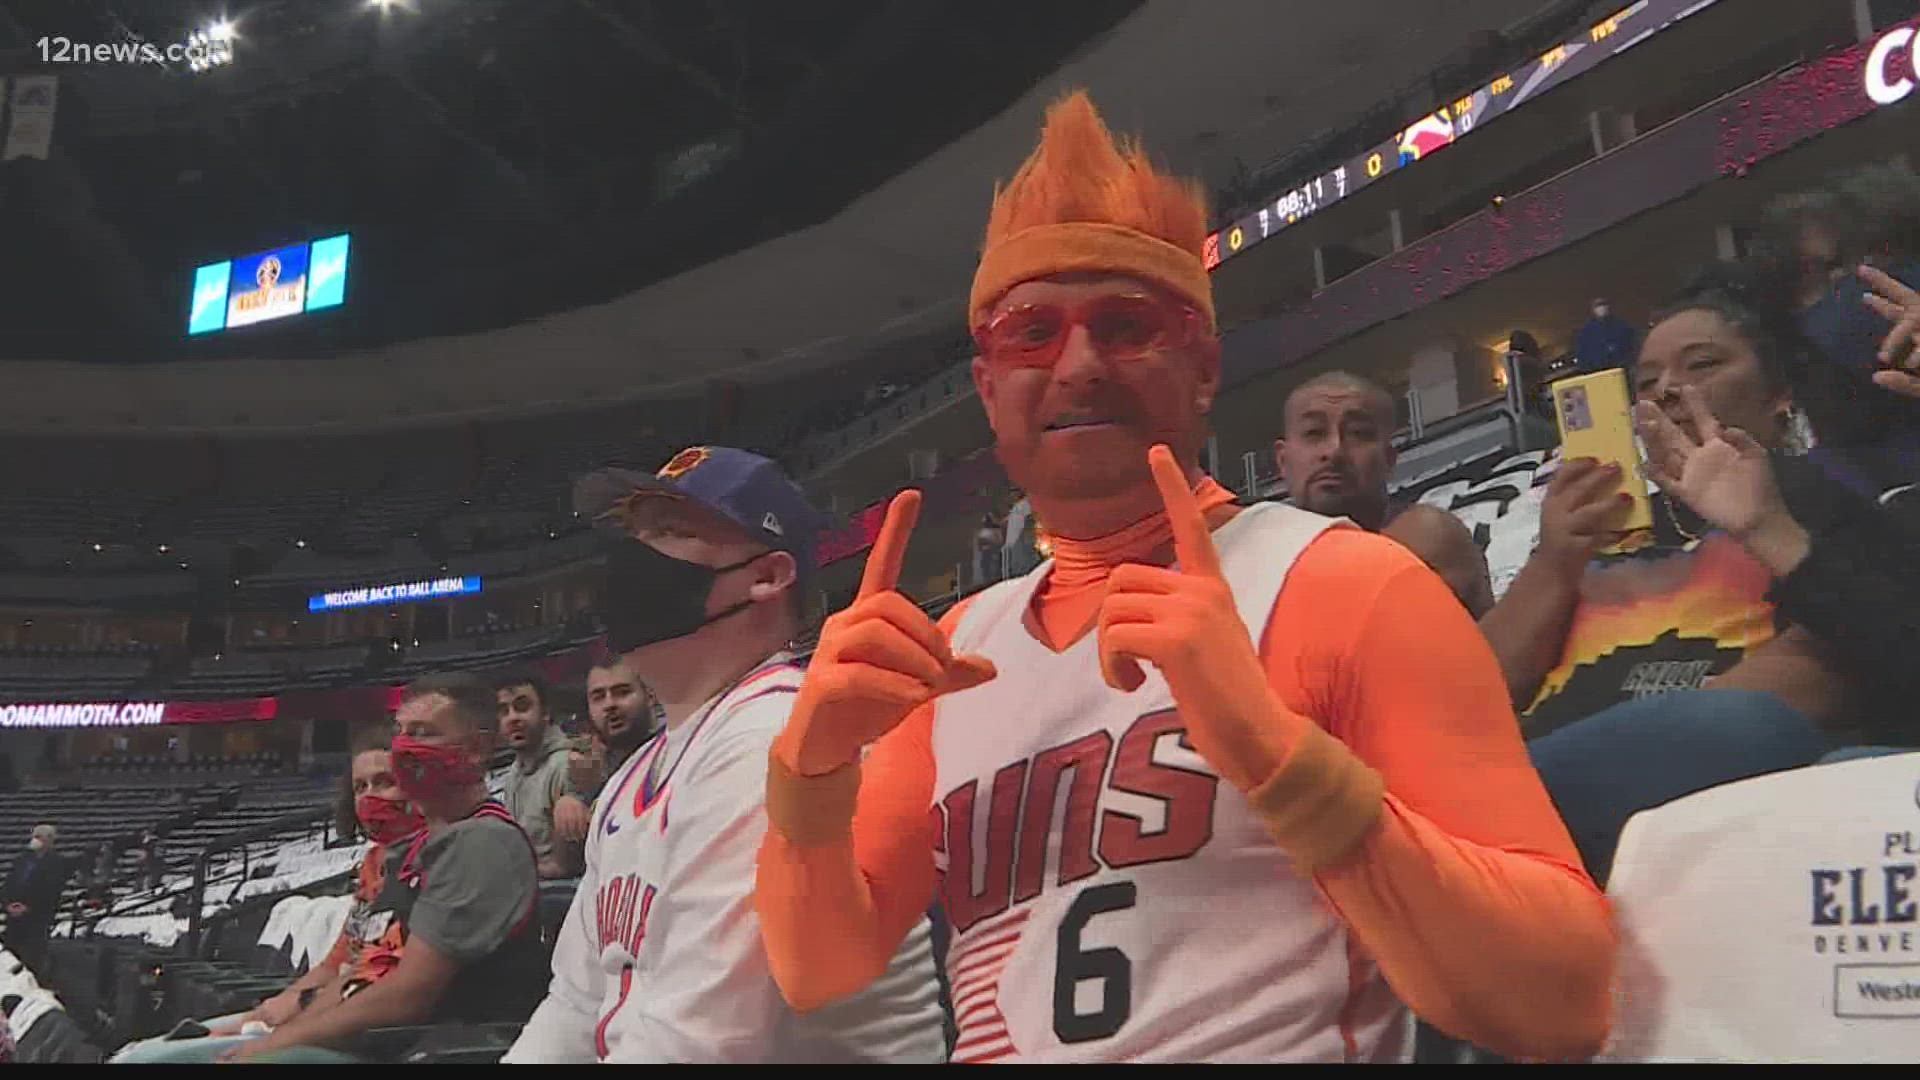 If you’ve been to a Phoenix Suns game in the last decade, you likely noticed one fan who stands out among the rest.